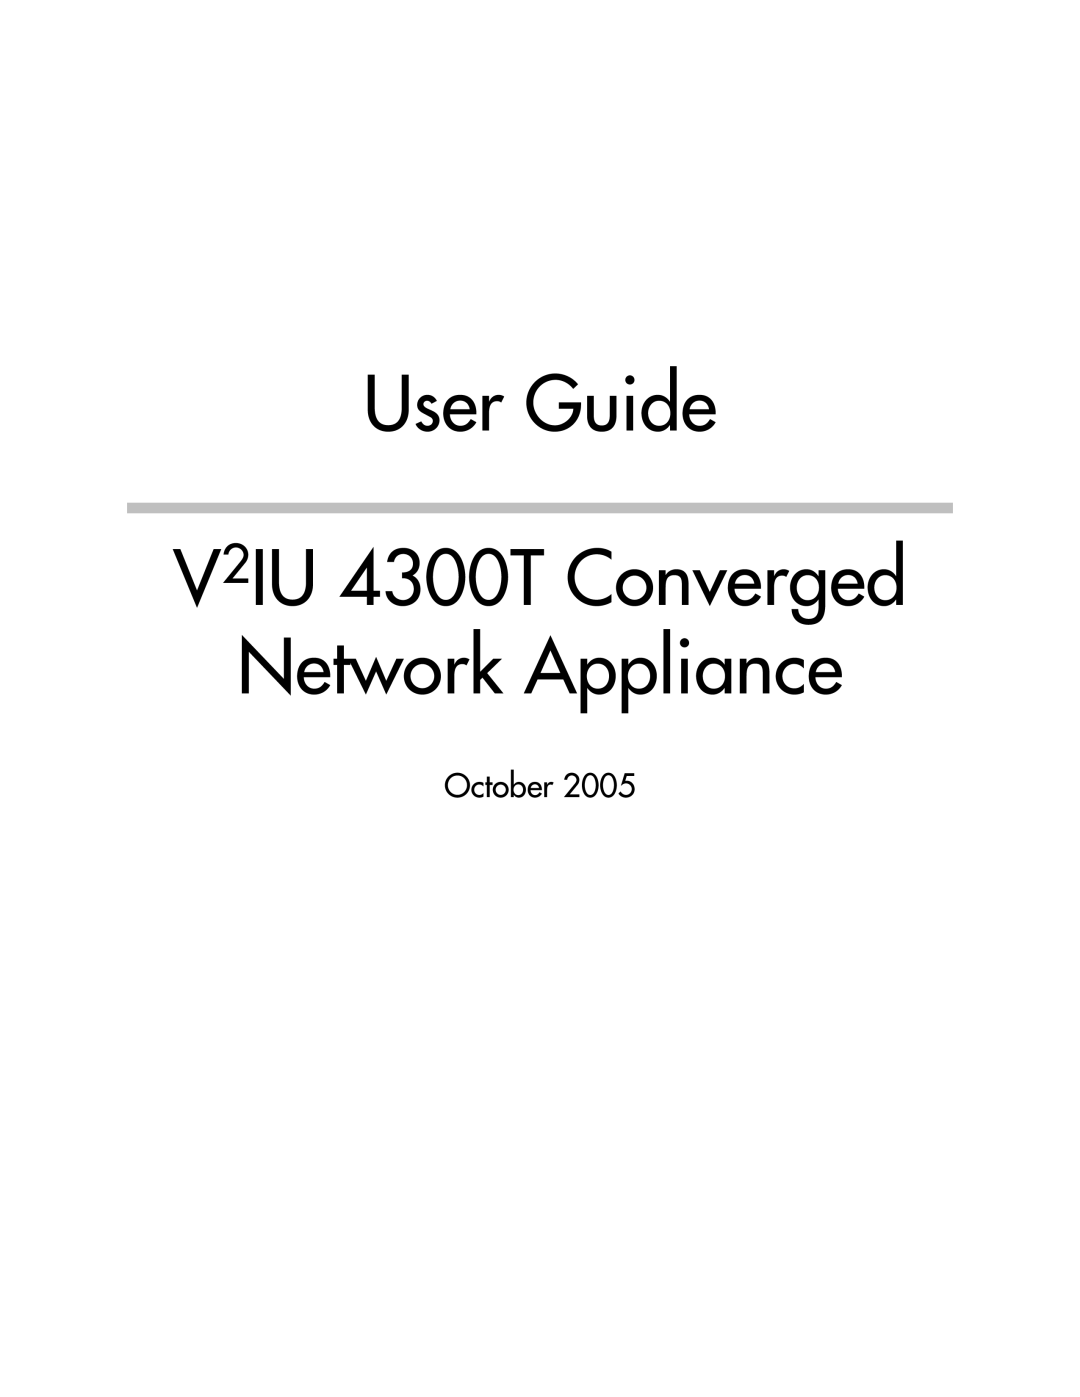 Polycom manual User Guide V2IU 4300T Converged Network Appliance 